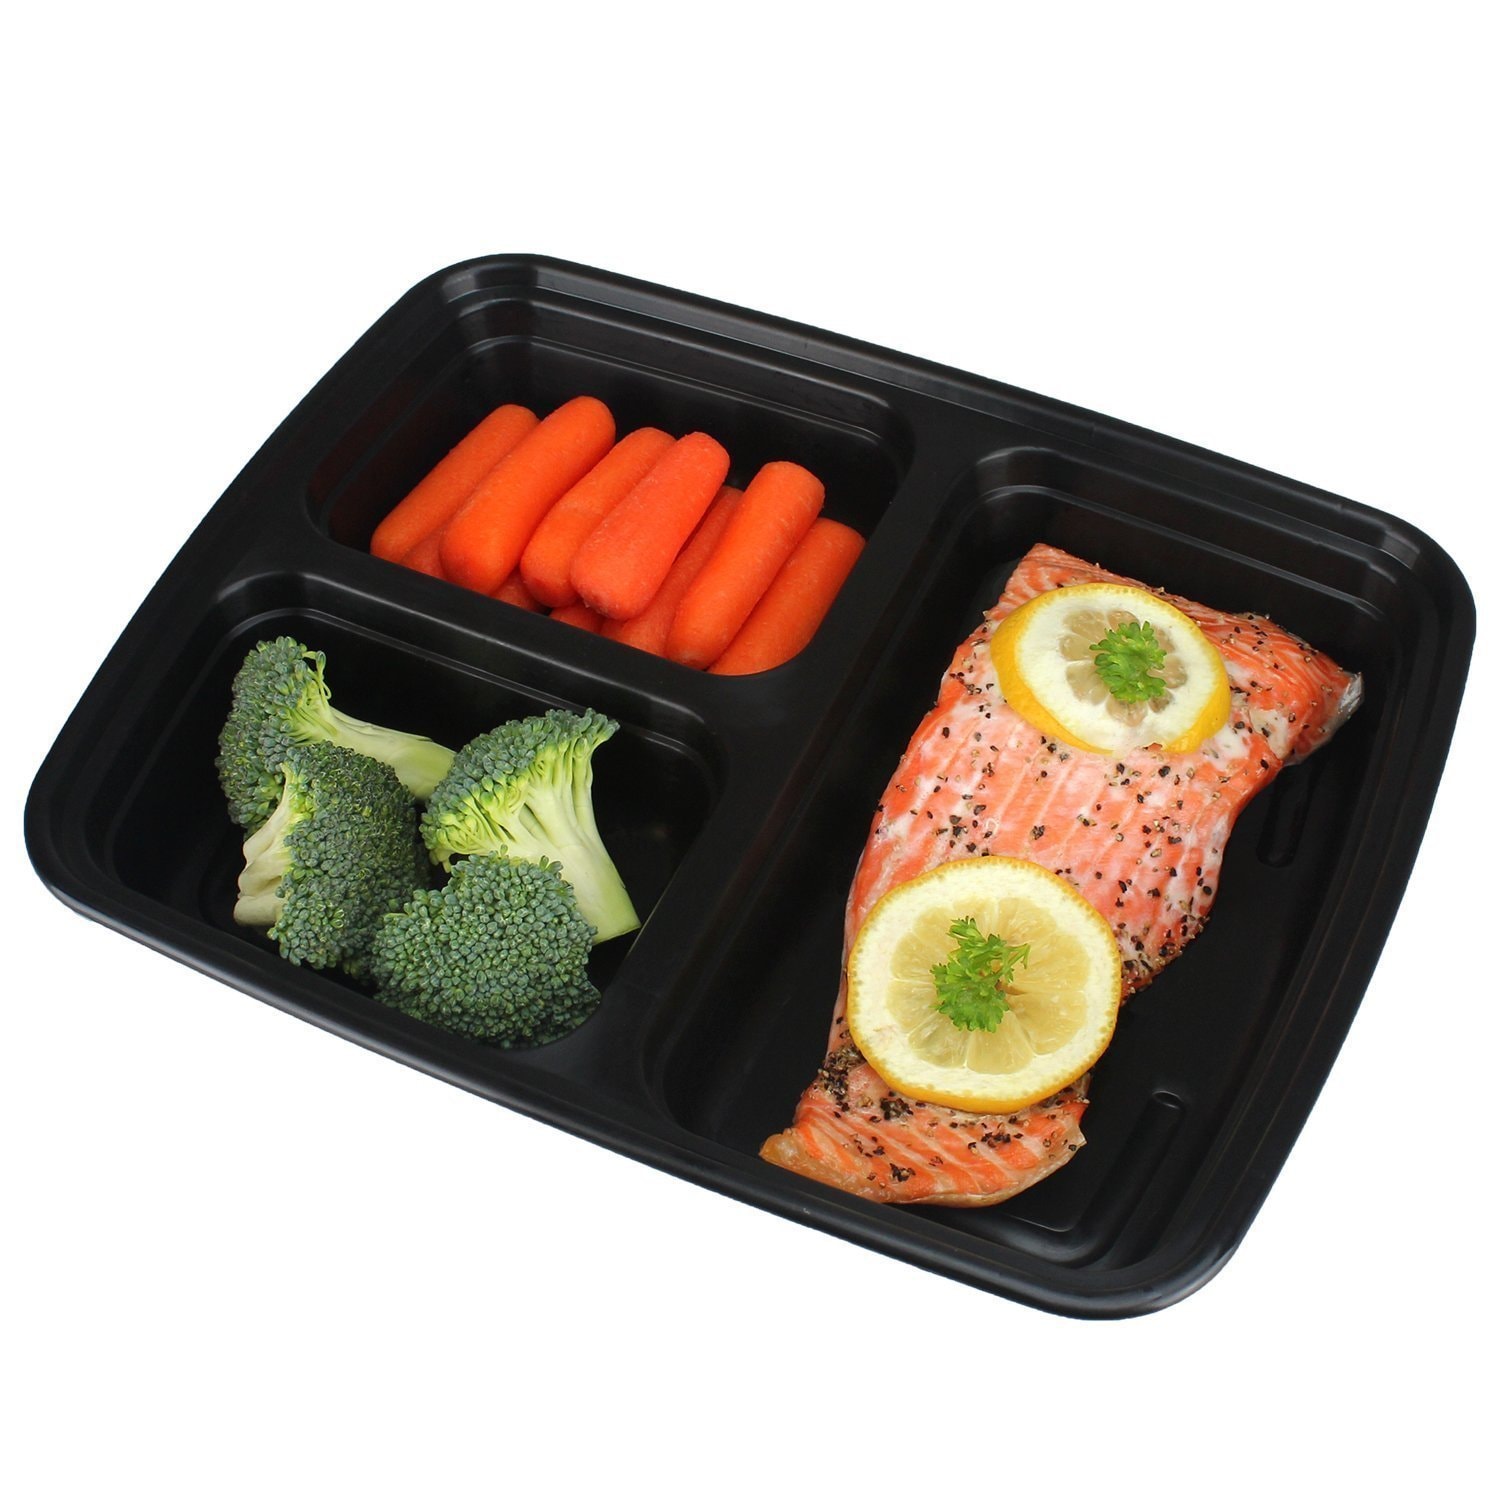 https://ak1.ostkcdn.com/images/products/14639651/Heim-Concept-3-Compartment-Premium-Meal-Prep-Food-Containers-with-Lids-Set-of-10-a62d2c2b-1653-4c69-8d65-75d4c0dd6e1a.jpg